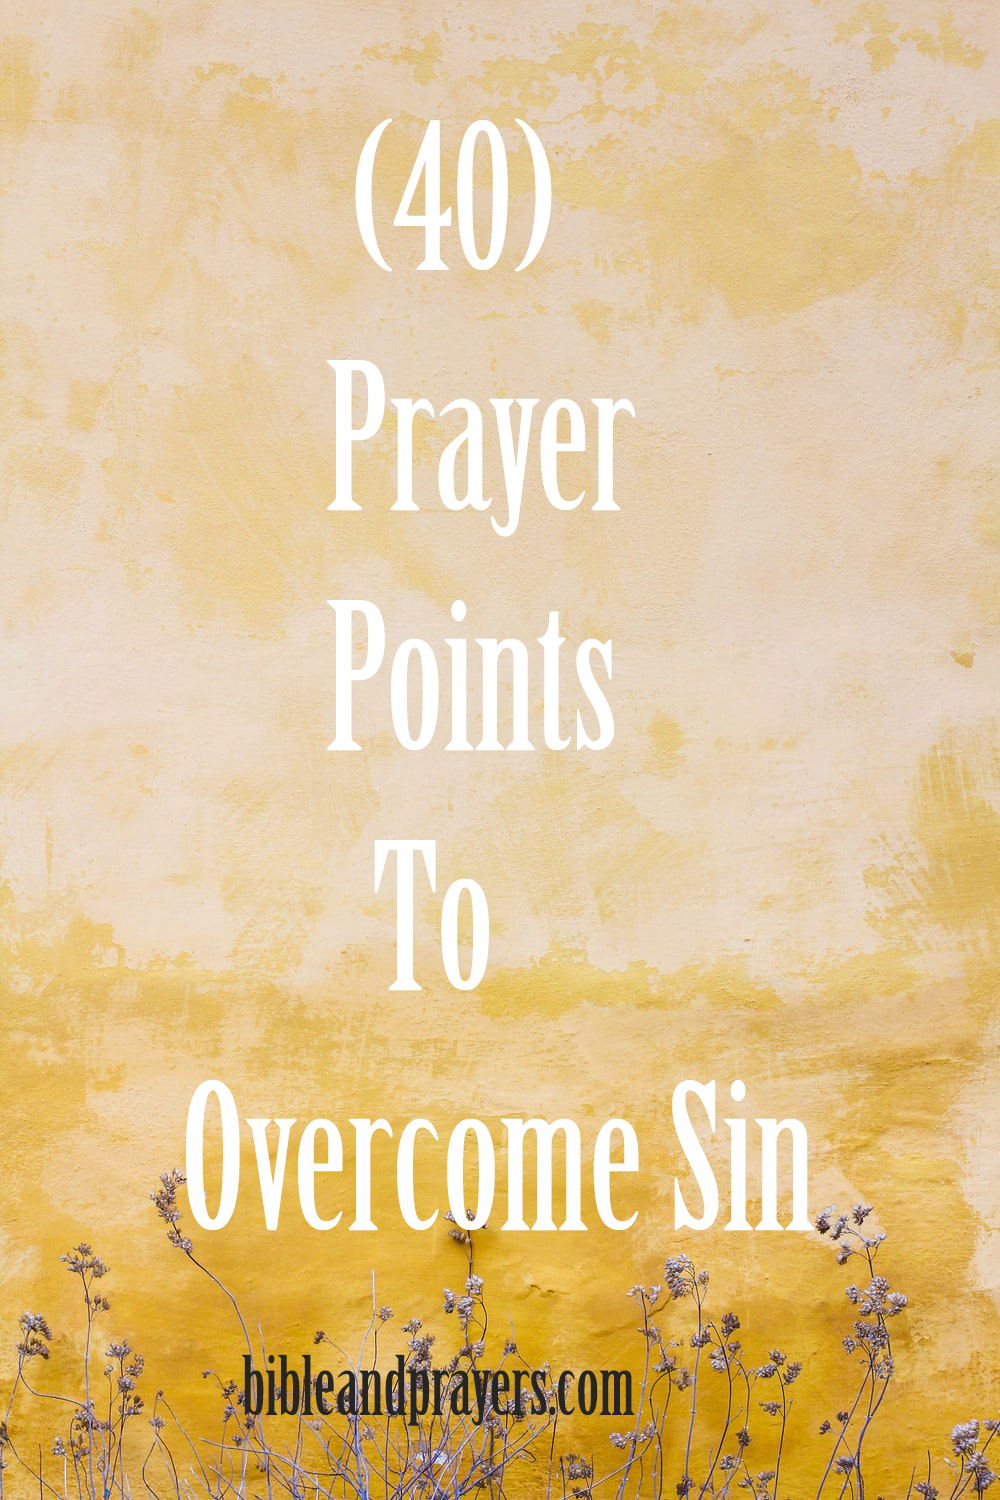 40 Prayer Points To Overcome Sin